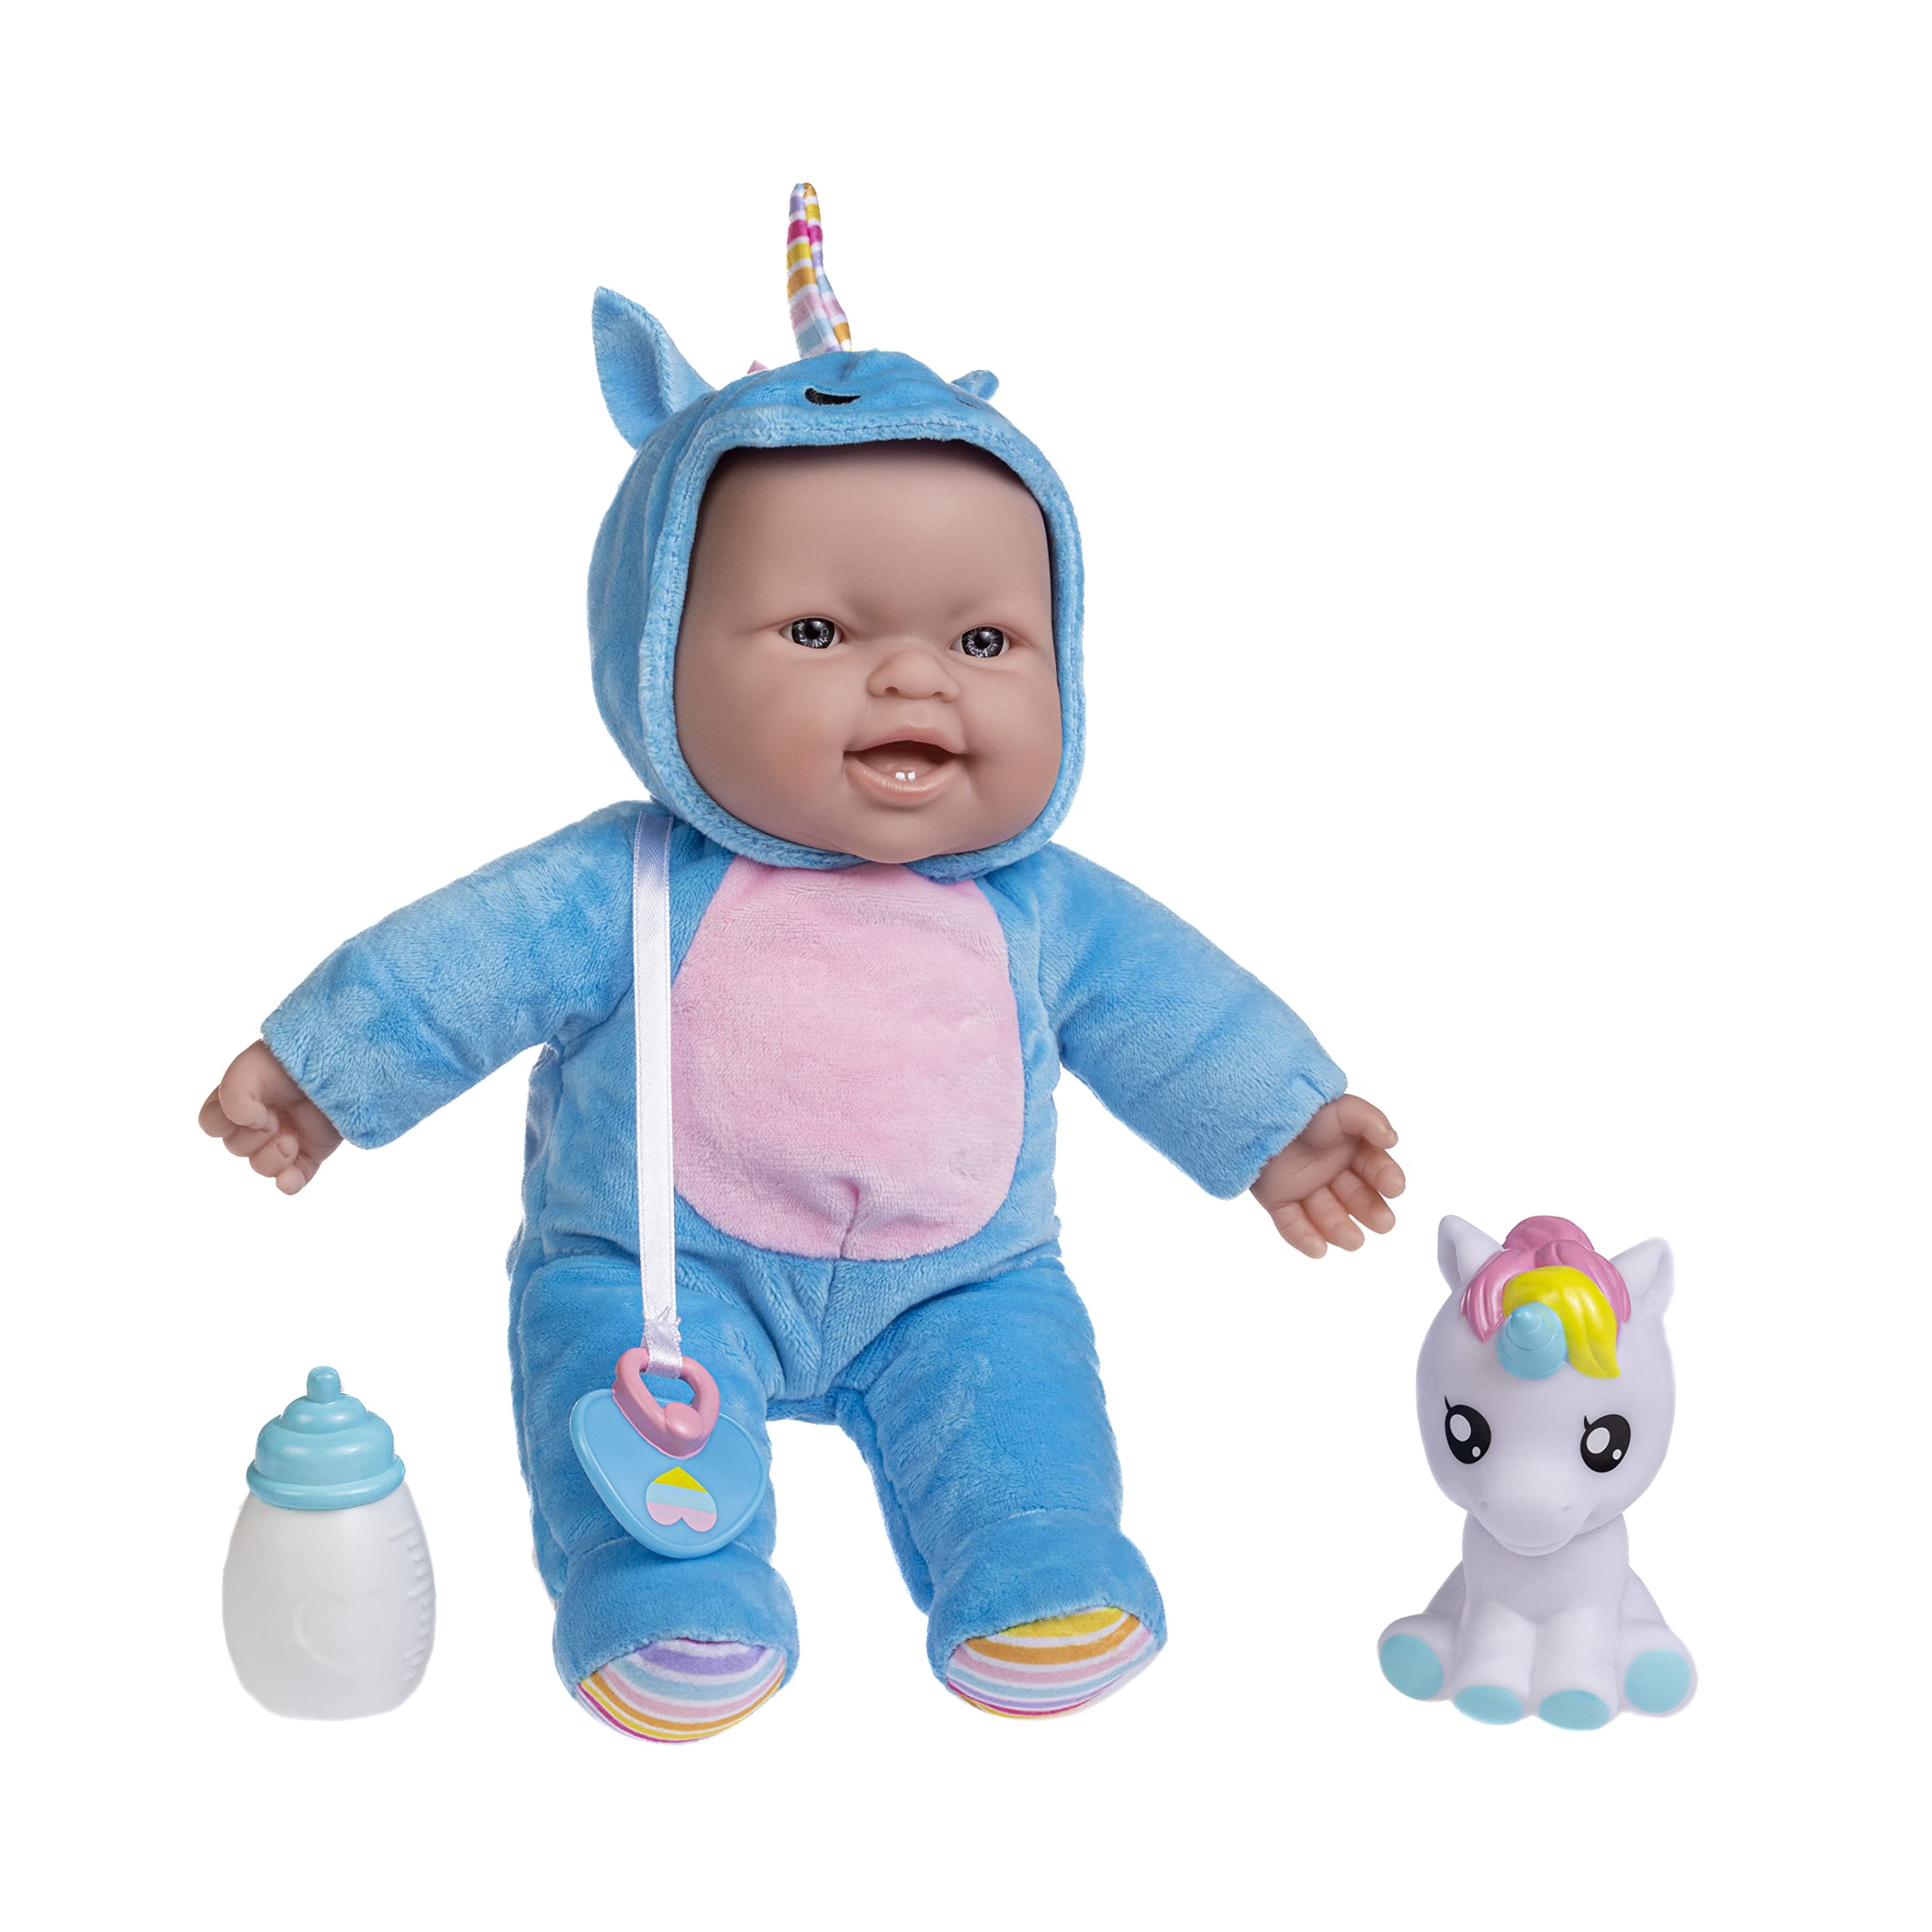 JC Toys Lots to Cuddle Babies 12-inch Small Soft Twin Baby Dolls Unicorn Theme| Washable | Pink and Blue | Includes Play Unicorns, Bottles, Pacifiers| for Children 12 Months +